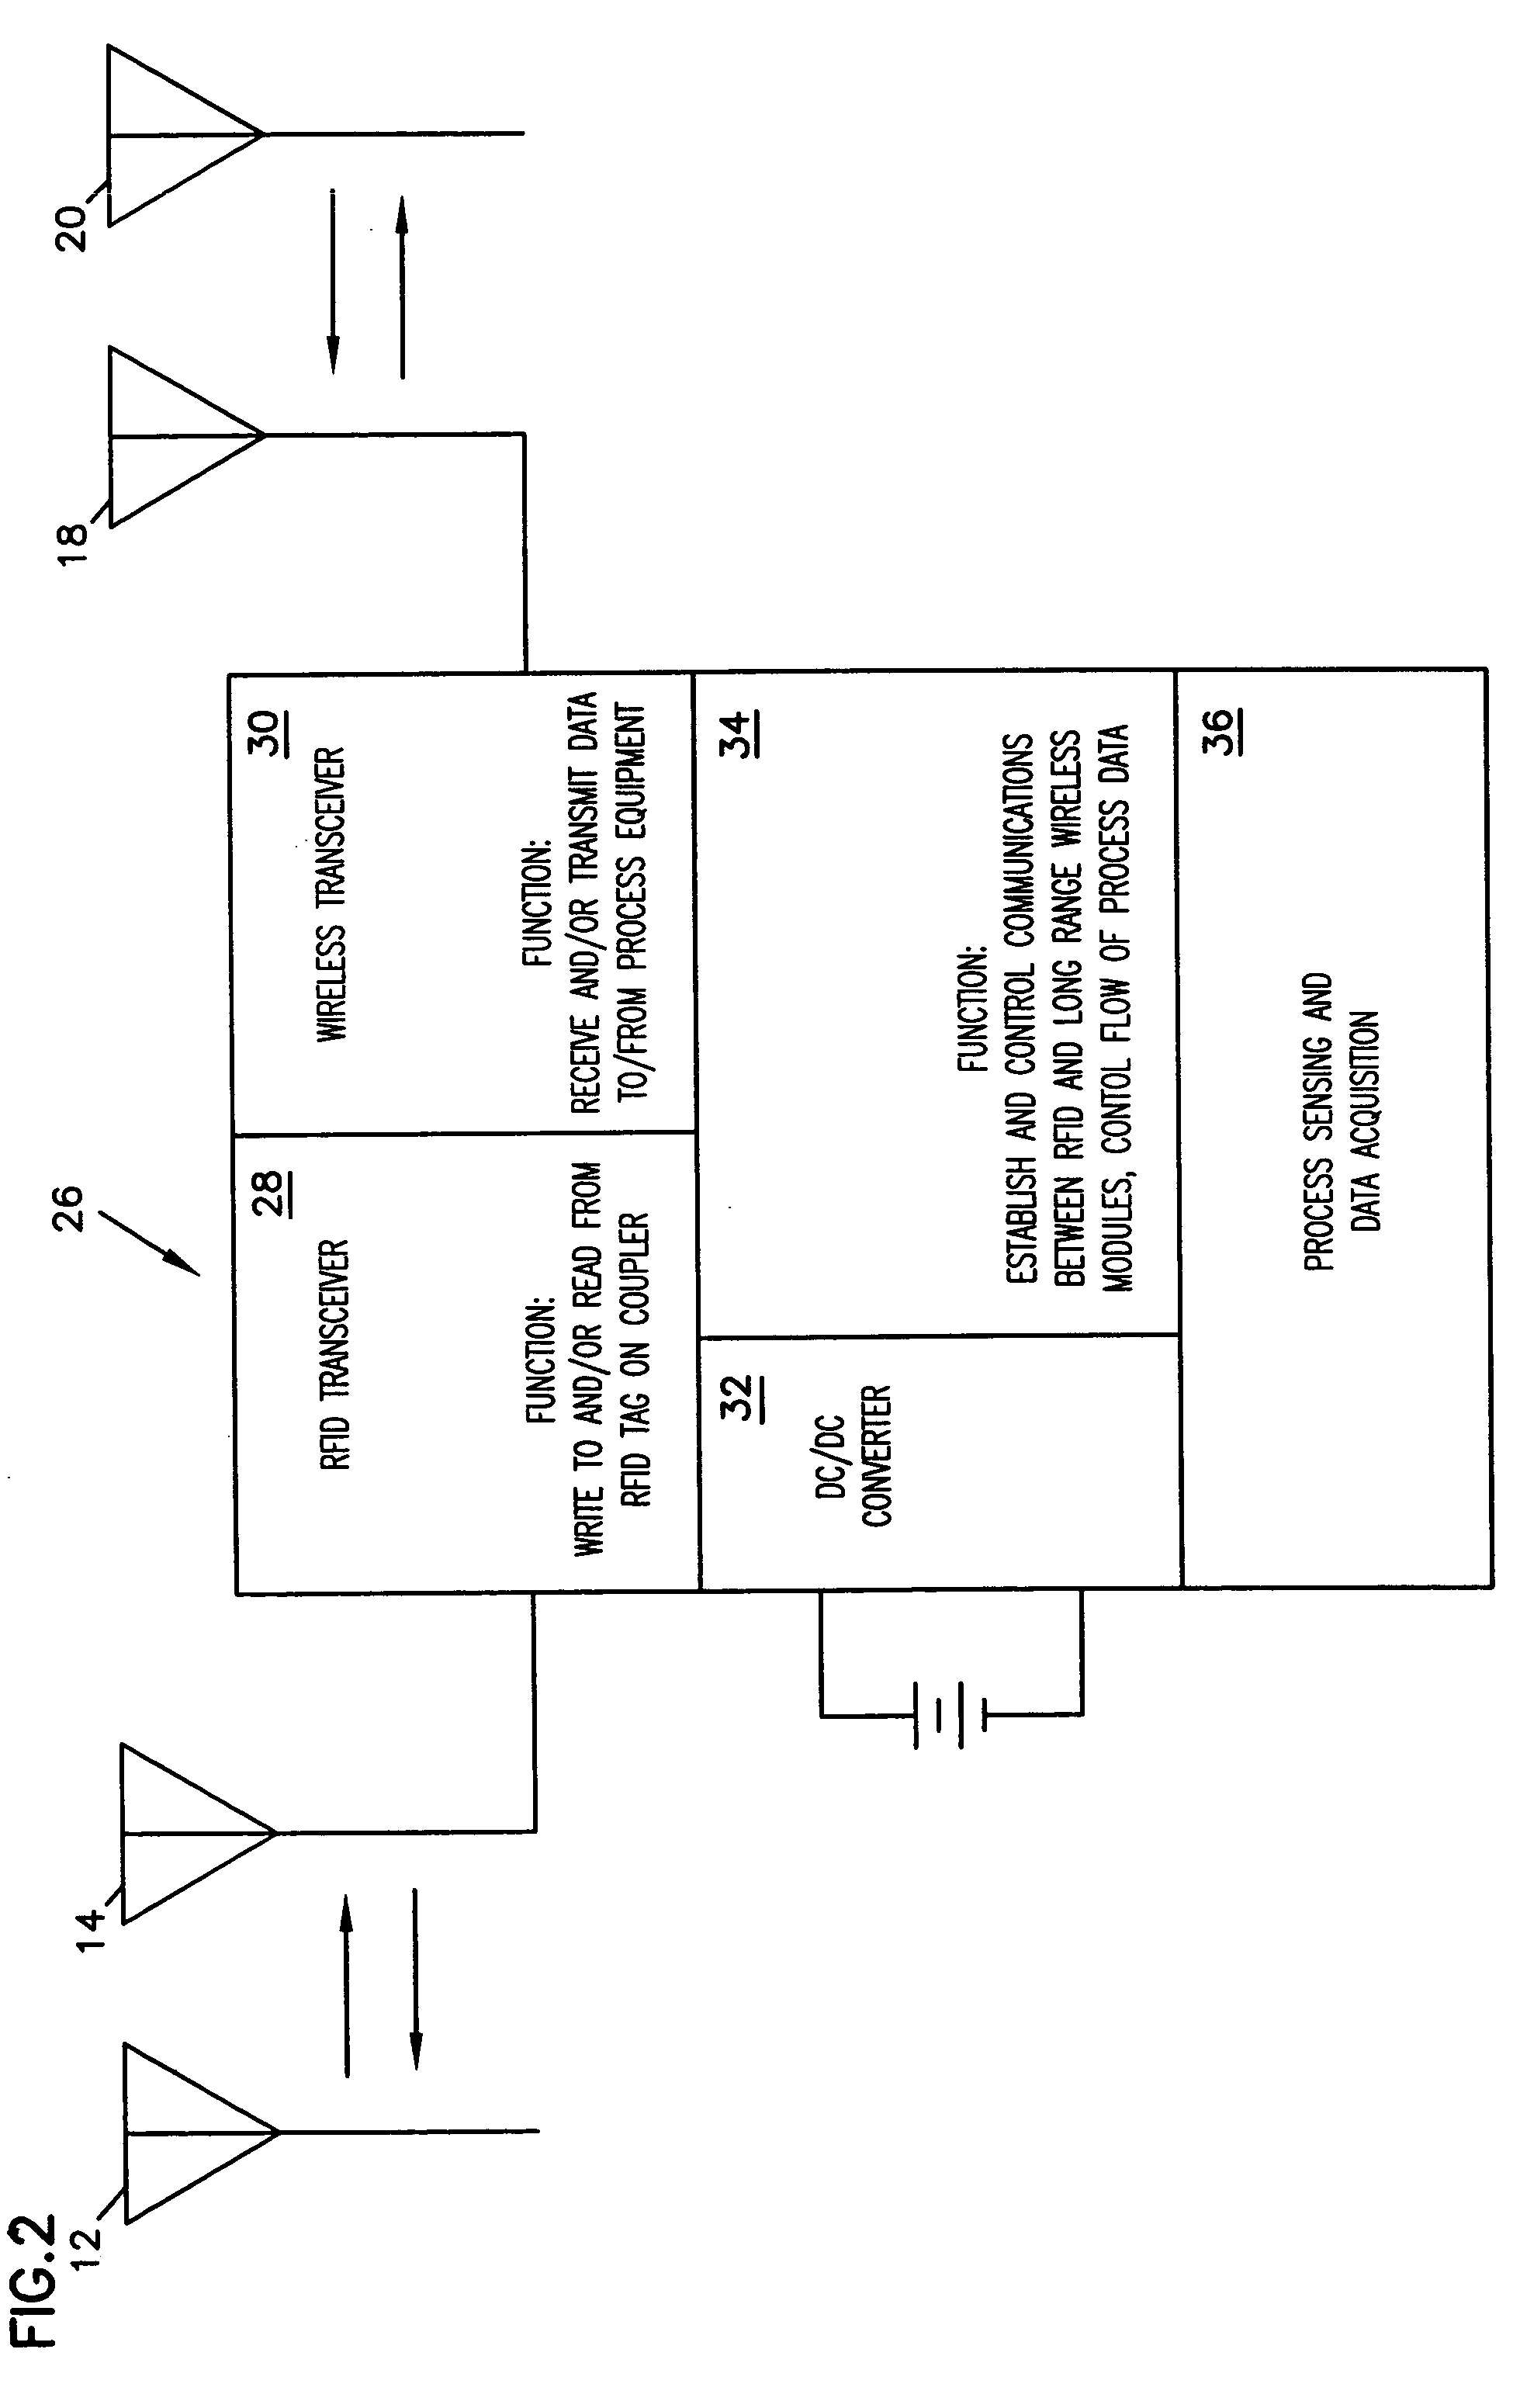 Connector apparatus and method for connecting the same for controlling fluid dispensing